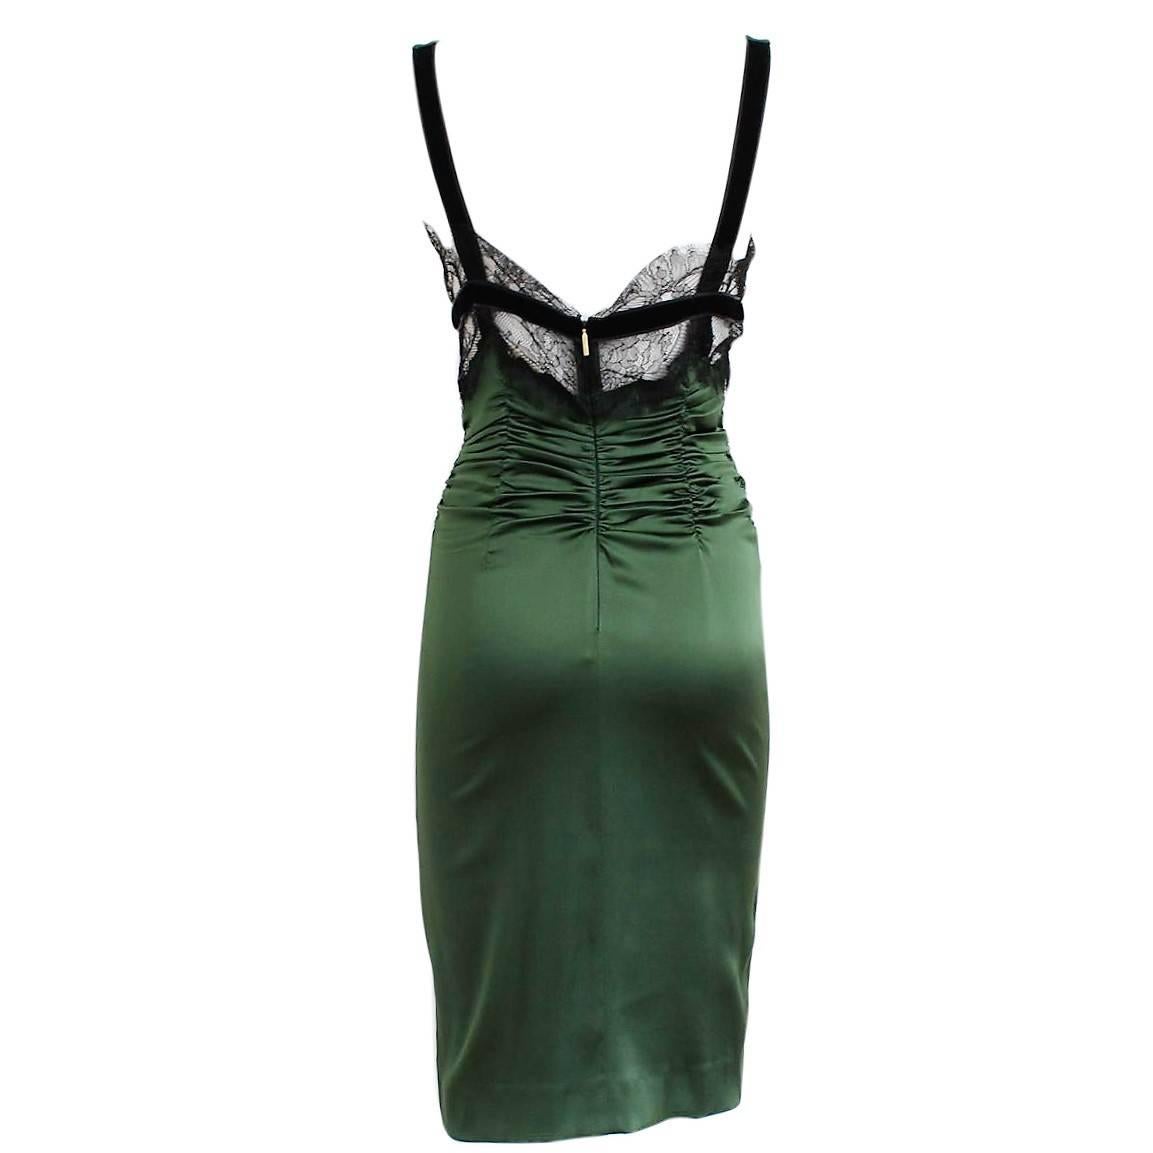 Fantastic dress by Roberto Cavalli
Green bottle color
Silk satin
Superb black lace on breast
Waist curliness
Total lenght (shoulder/hem) cm 102 (40 inches)
Made in Italy
Worldwide express shipping included in the price !